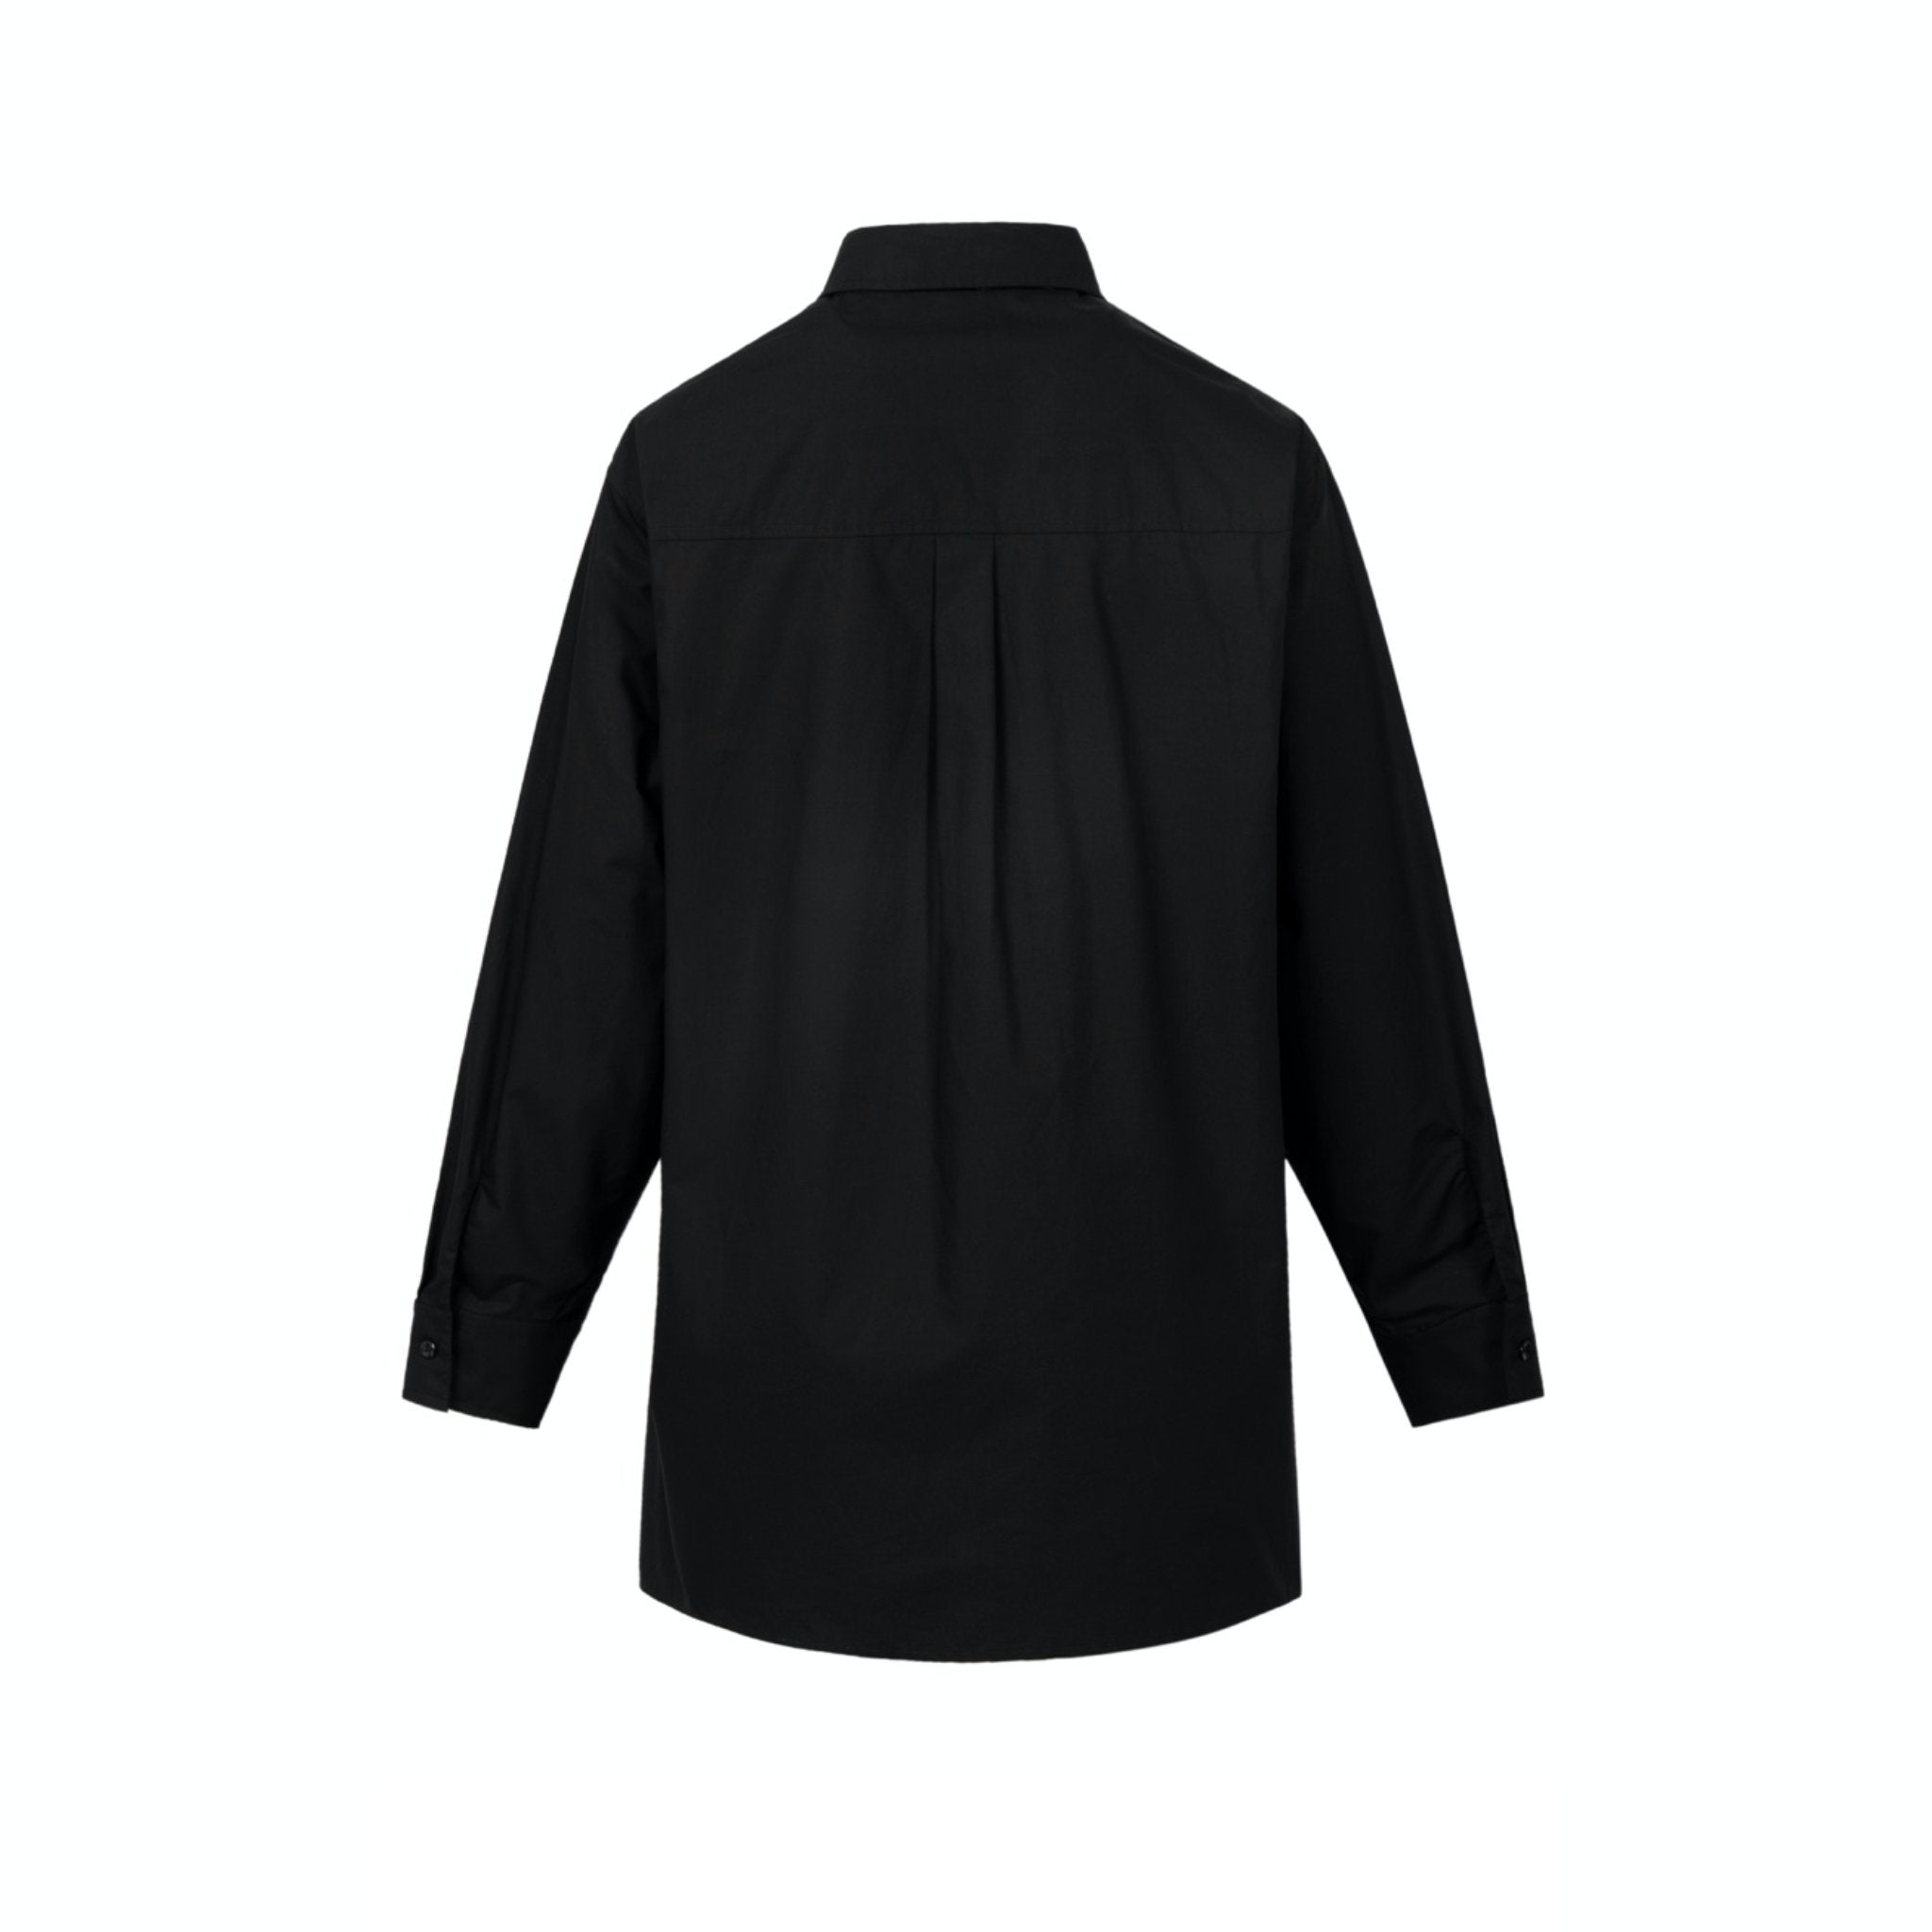 13 DE MARZO Pearl Hollow Out Shirt Black | MADA IN CHINA